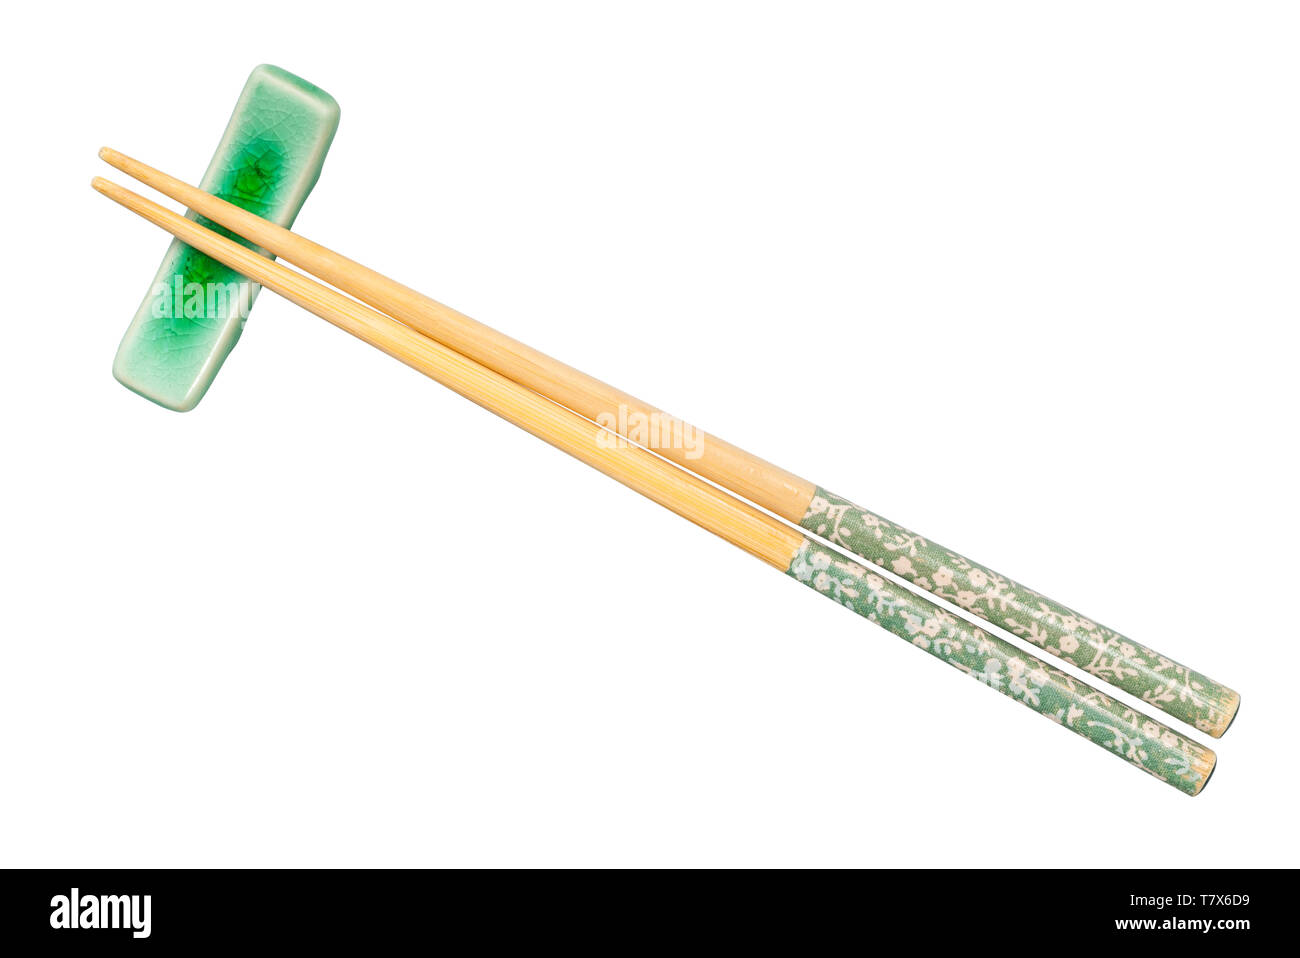 top view of decorated wooden chopsticks served on chopstick rest isolated on white background Stock Photo